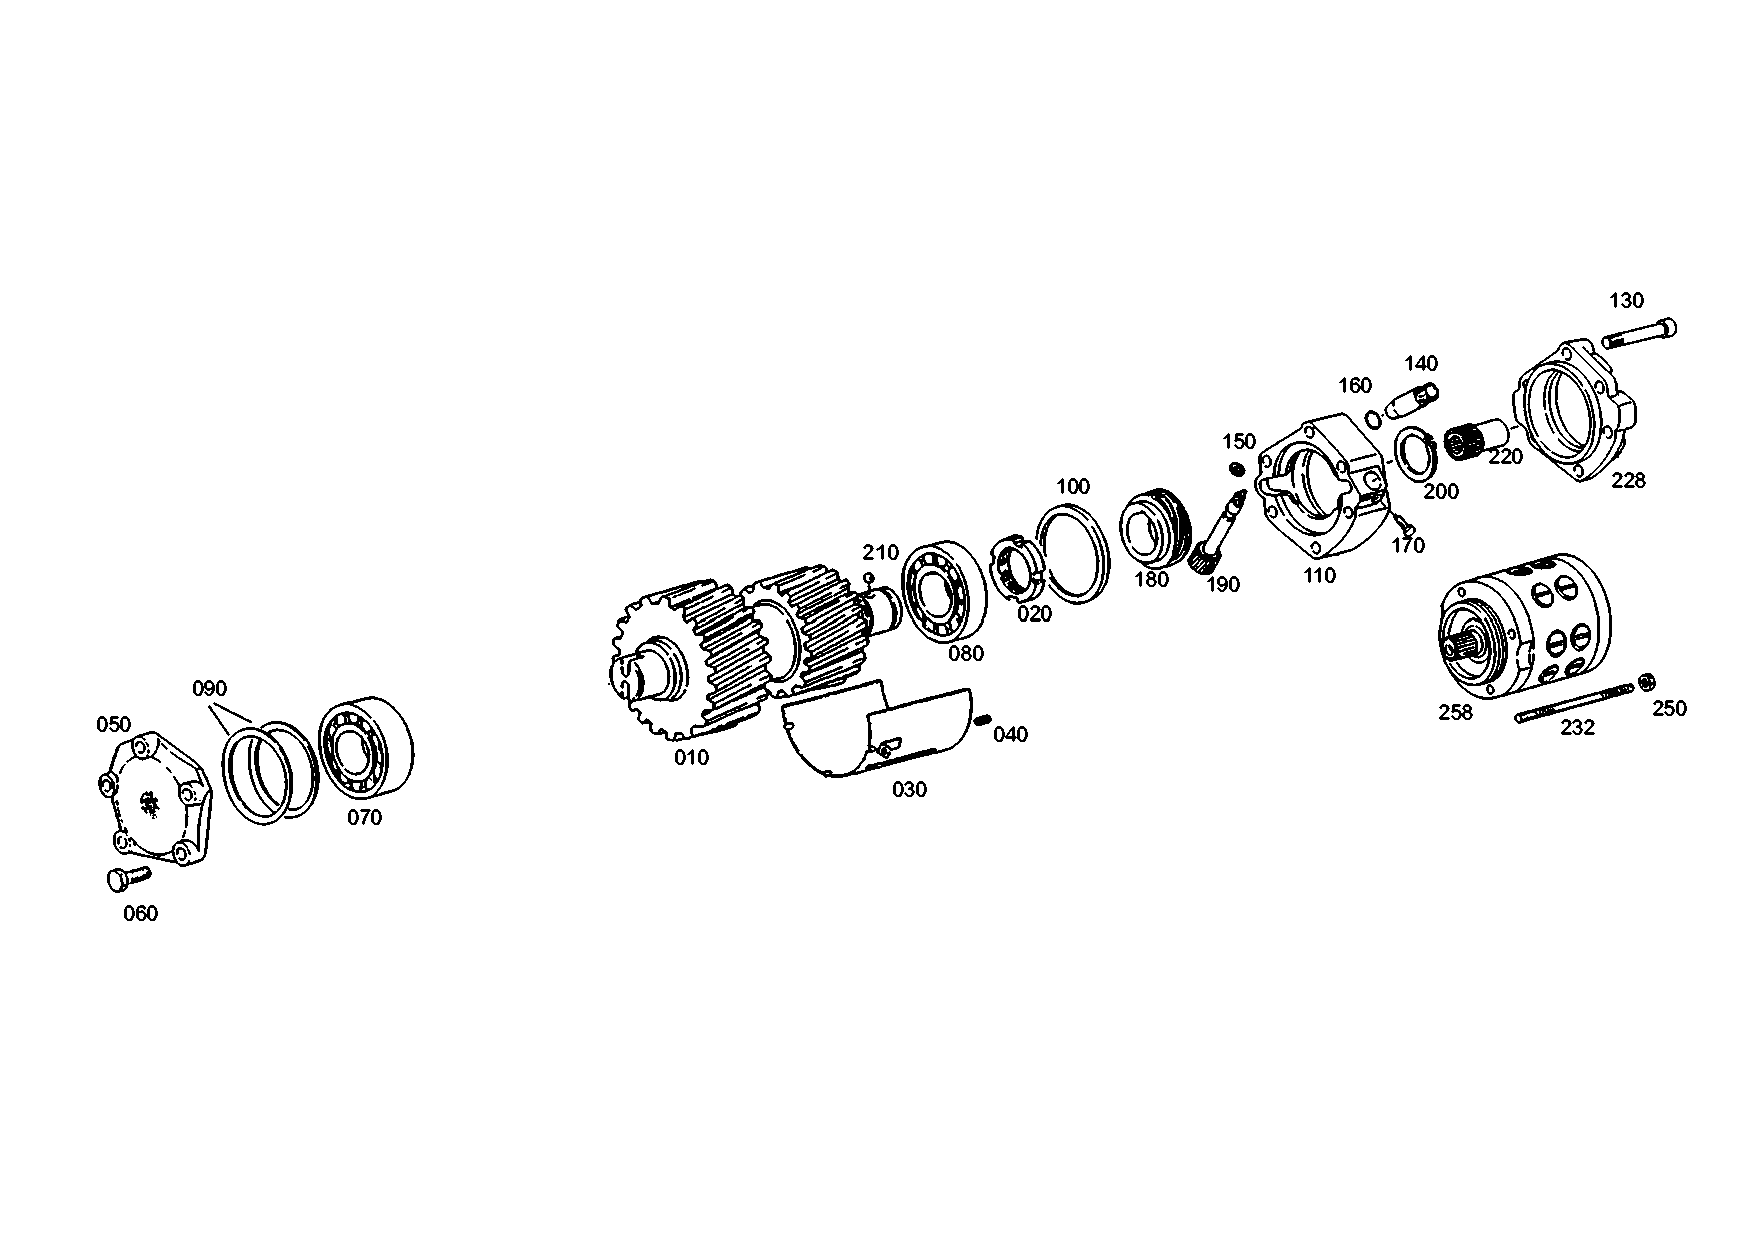 drawing for LUNA EQUIPOS INDUSTRIEALES, S.A. 172000210023 - BEARING BUSH (figure 3)